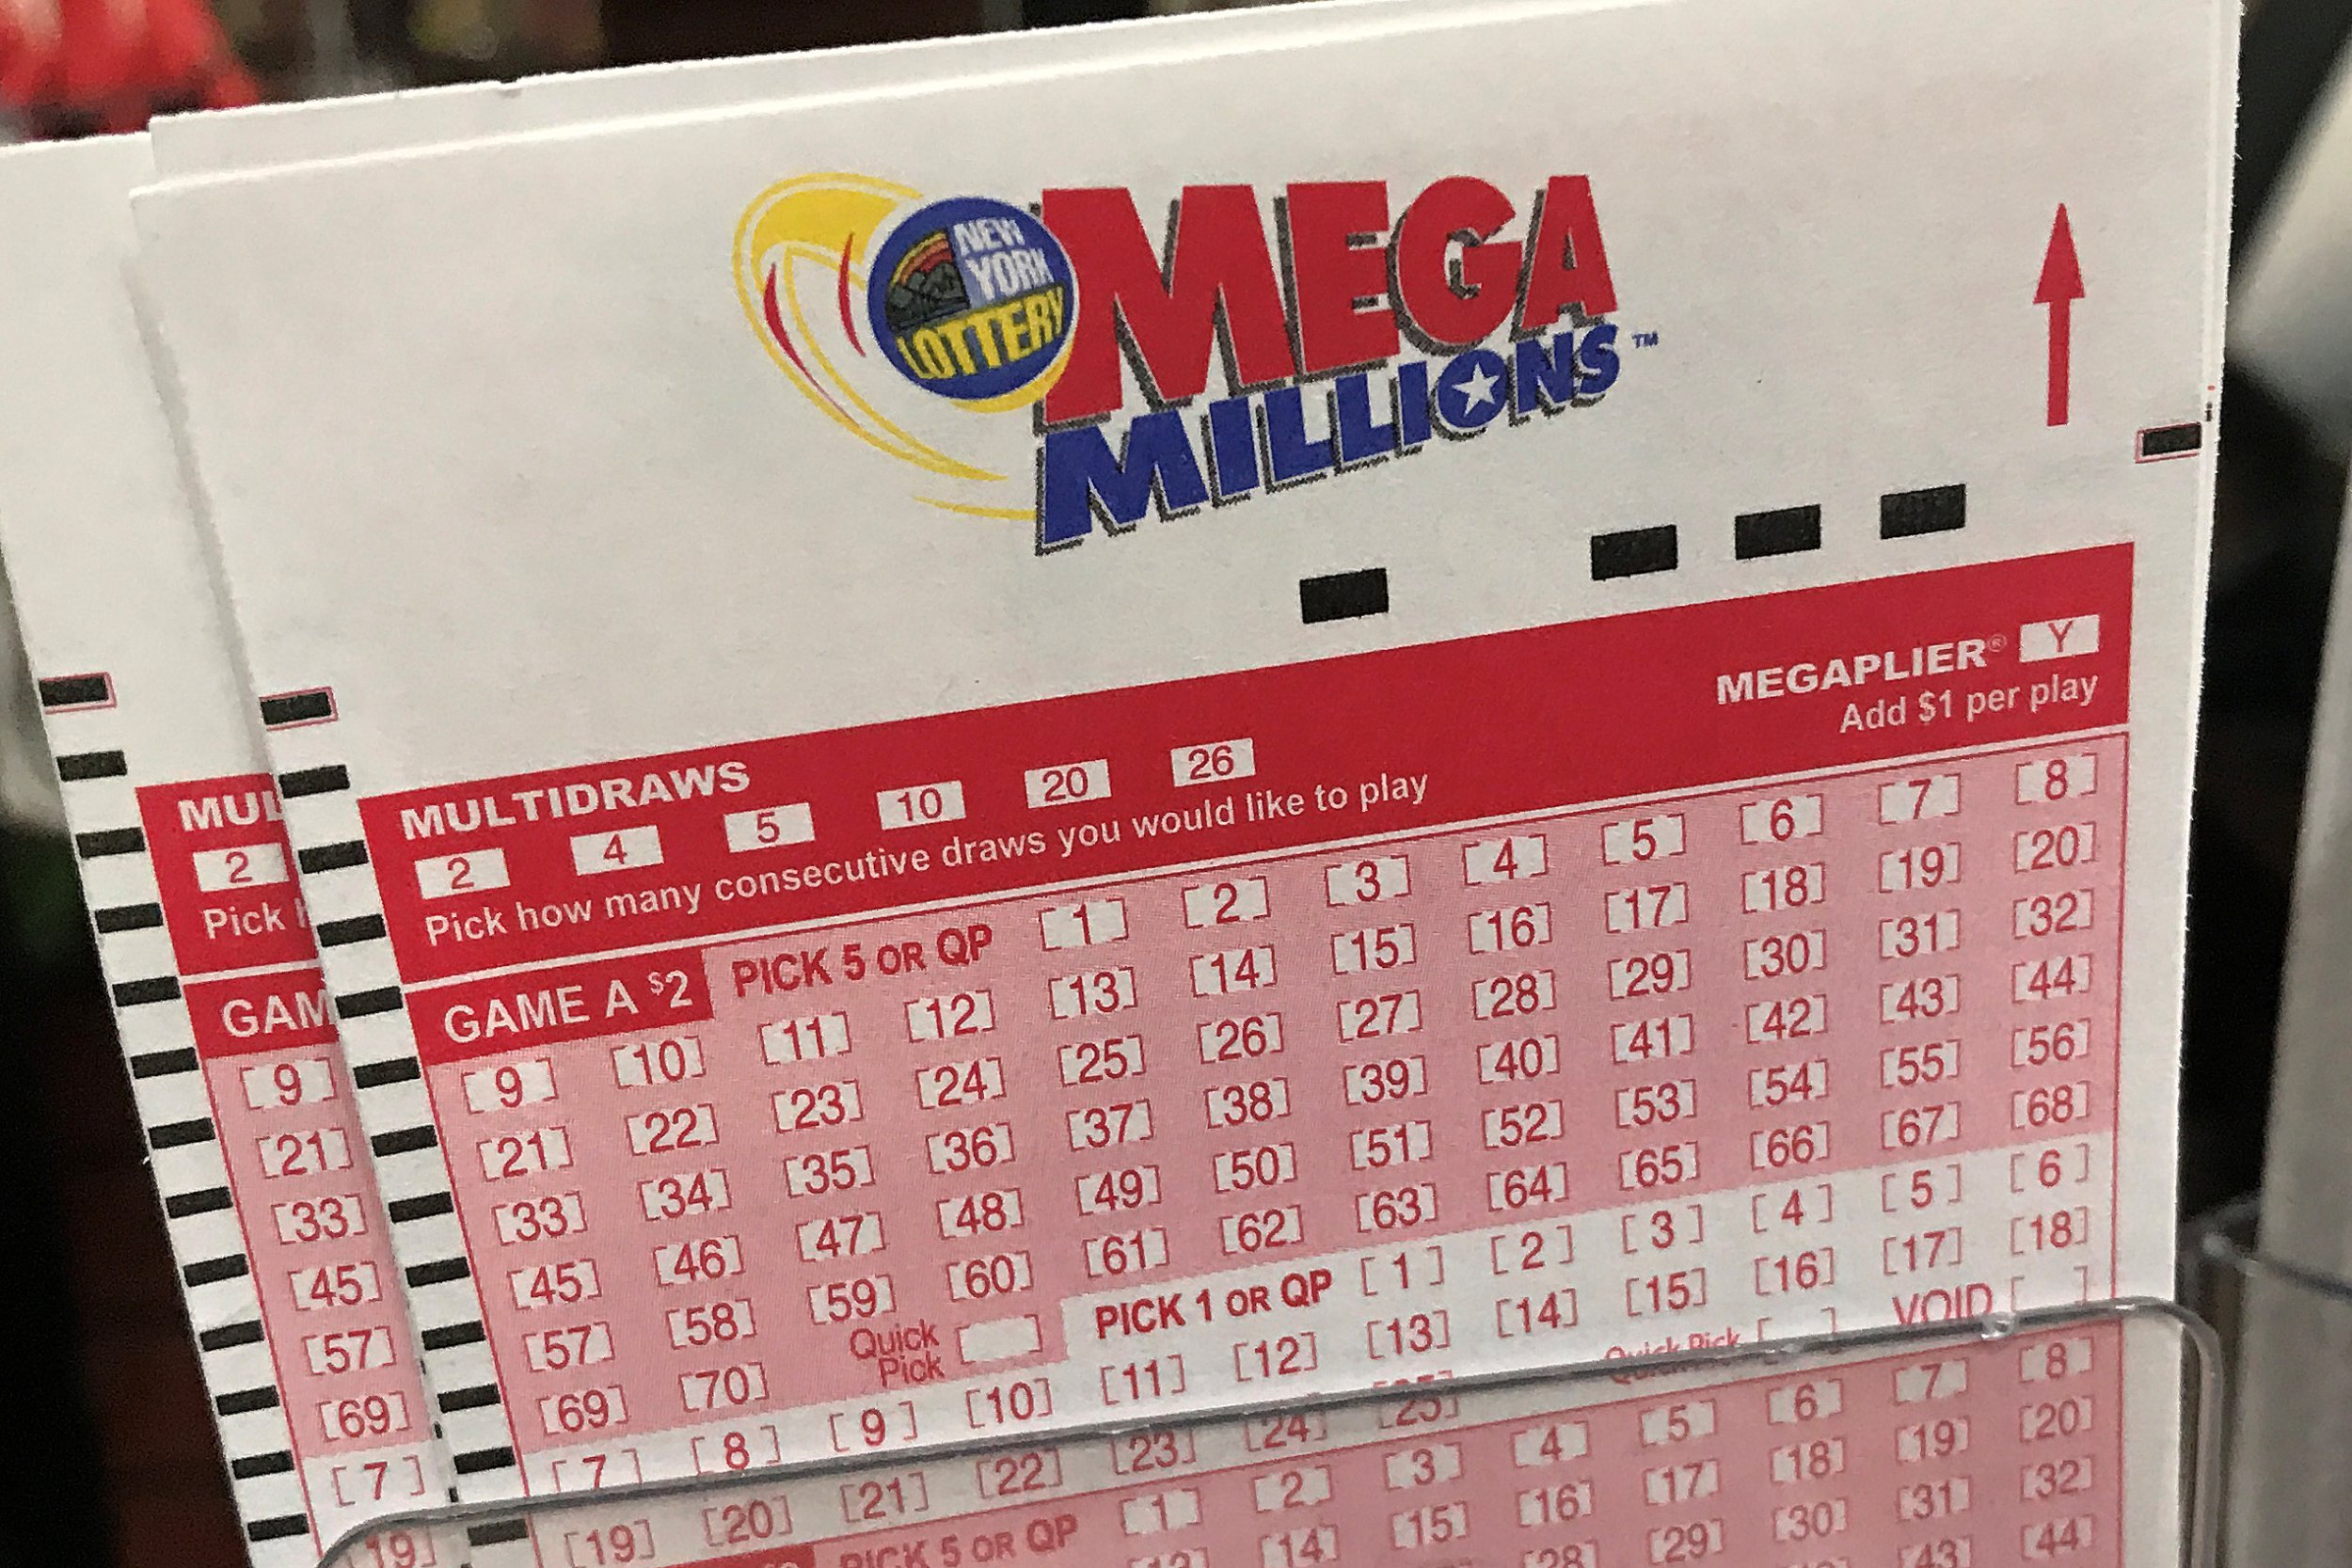 how to purchase mega millions tickets online